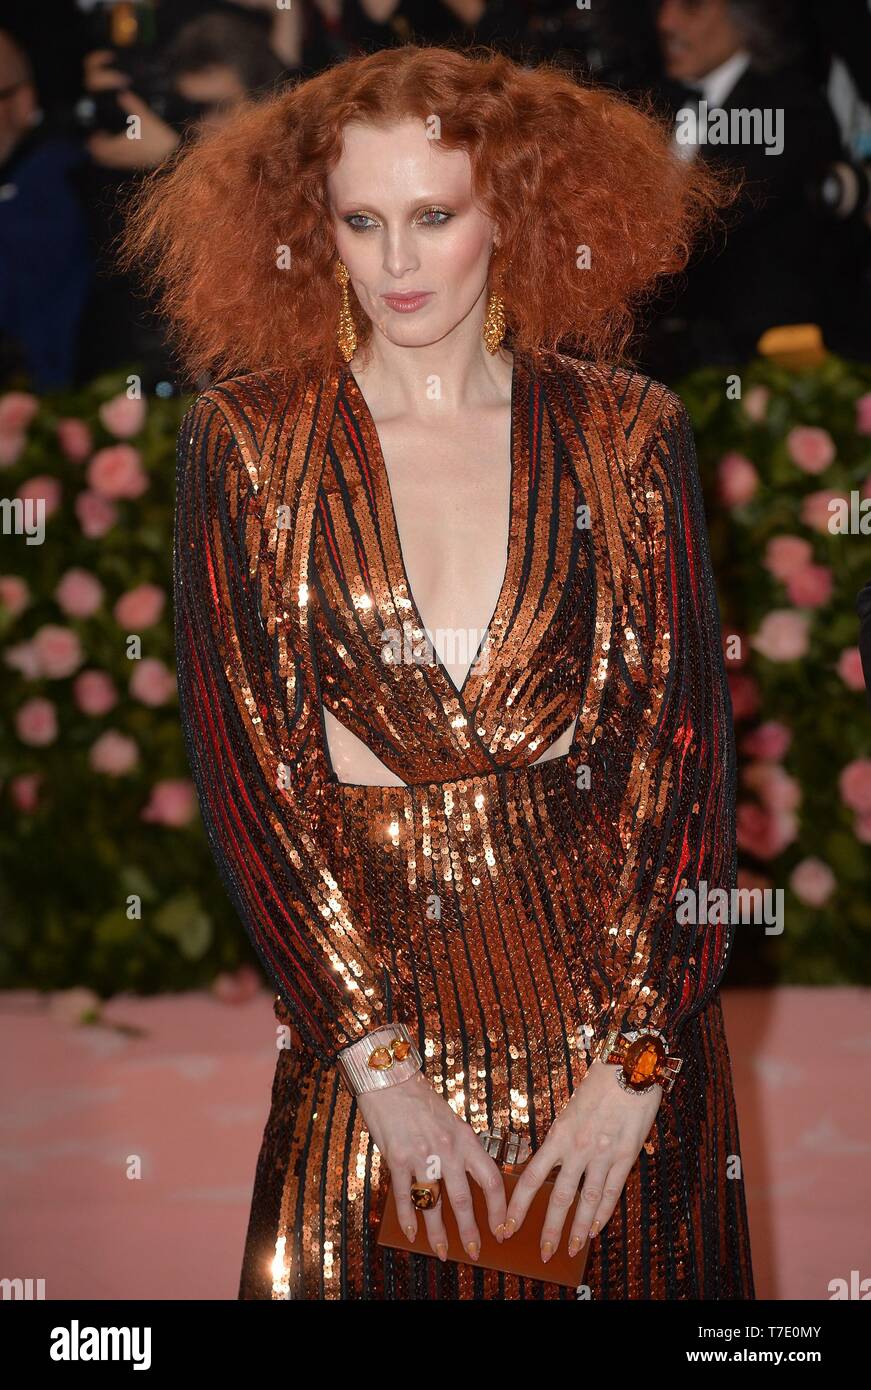 New York, NY, USA. 6th May, 2019. Karen Elson at arrivals for Camp: Notes on Fashion Met Gala Costume Institute Annual Benefit - Part 2, Metropolitan Museum of Art, New York, NY May 6, 2019. Credit: Everett Collection Inc/Alamy Live News Stock Photo